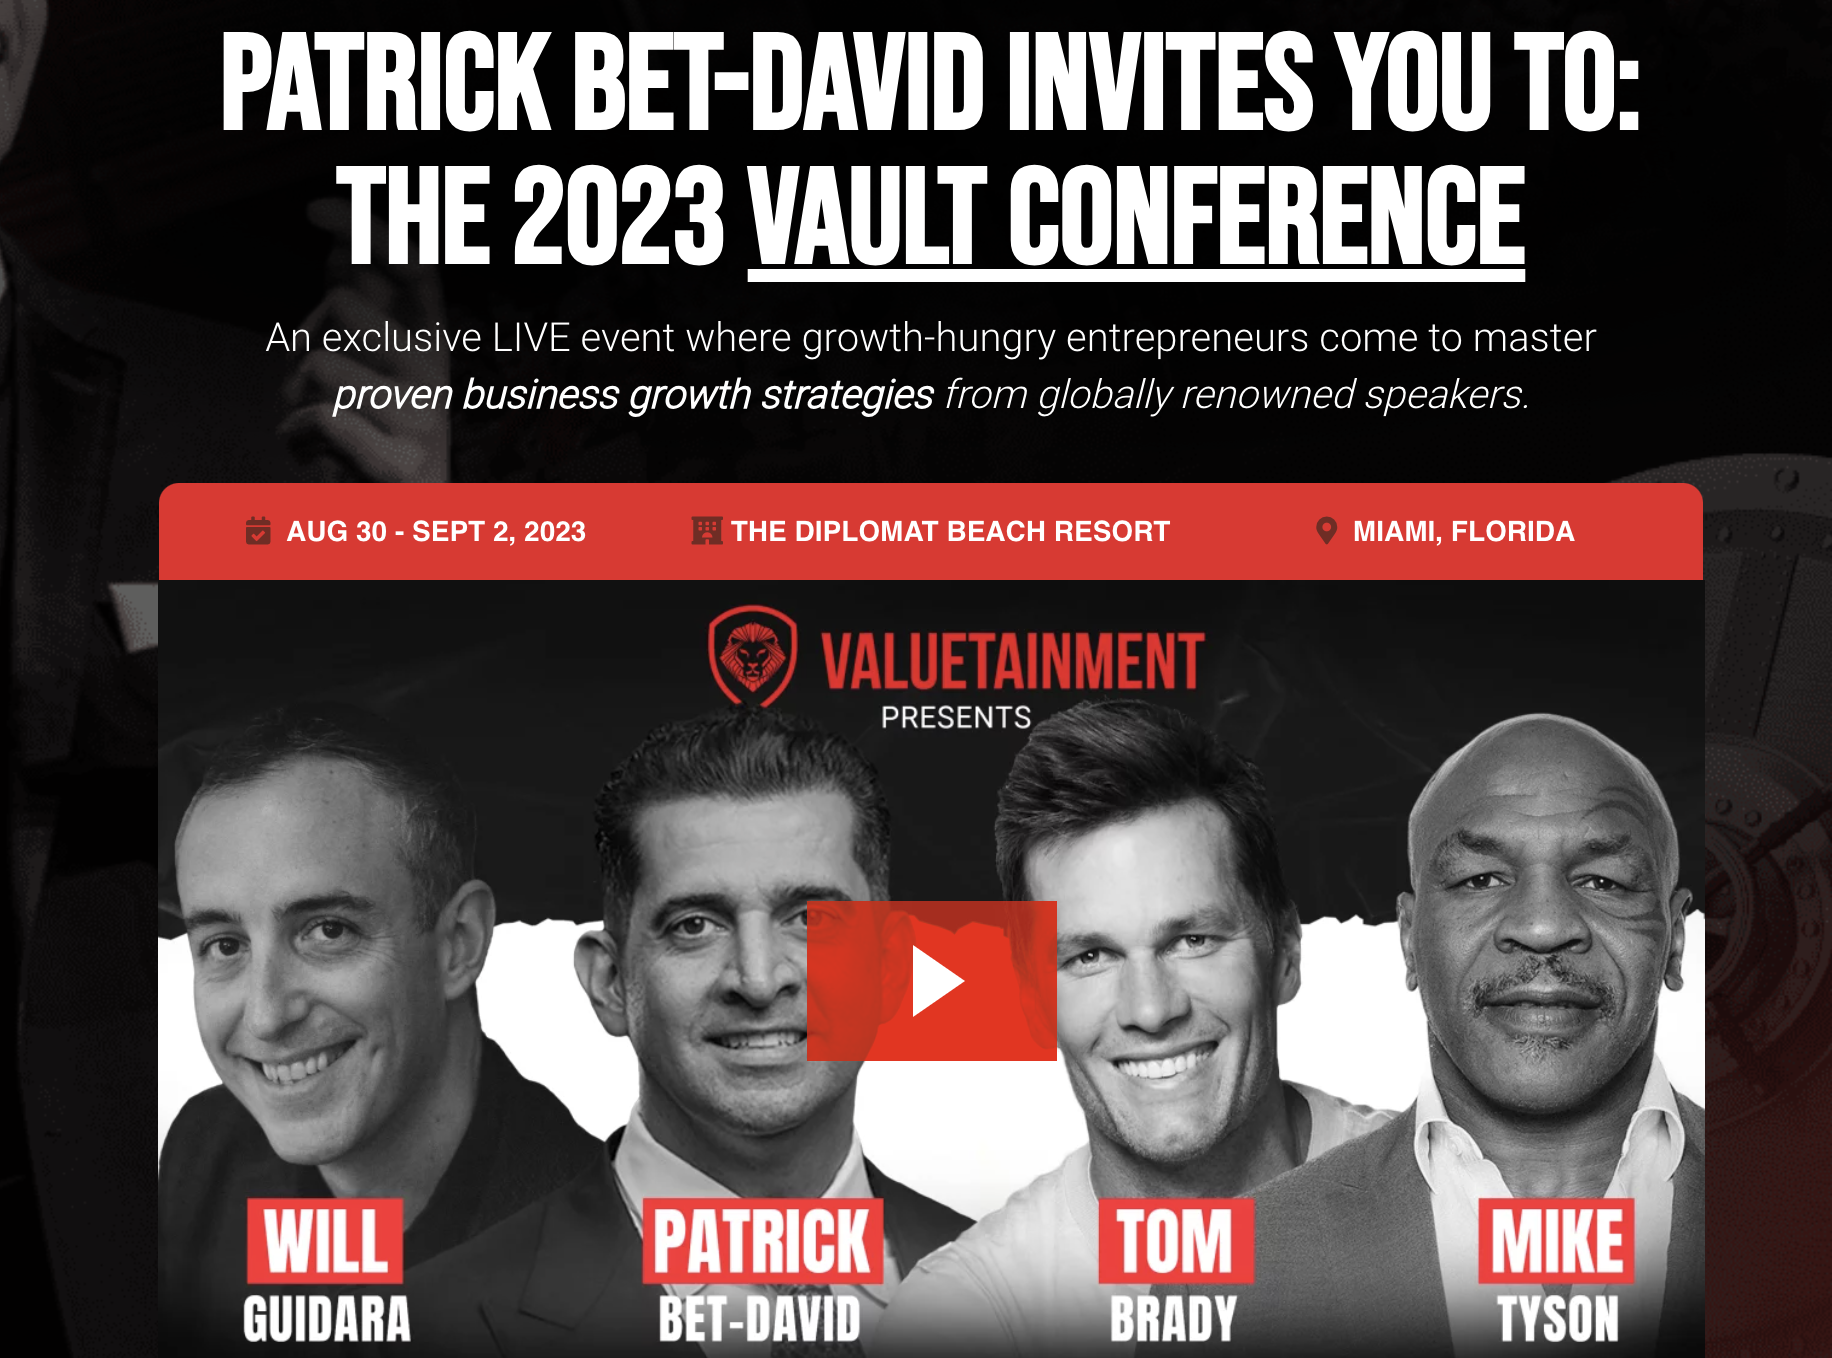 The Vault Conference Review